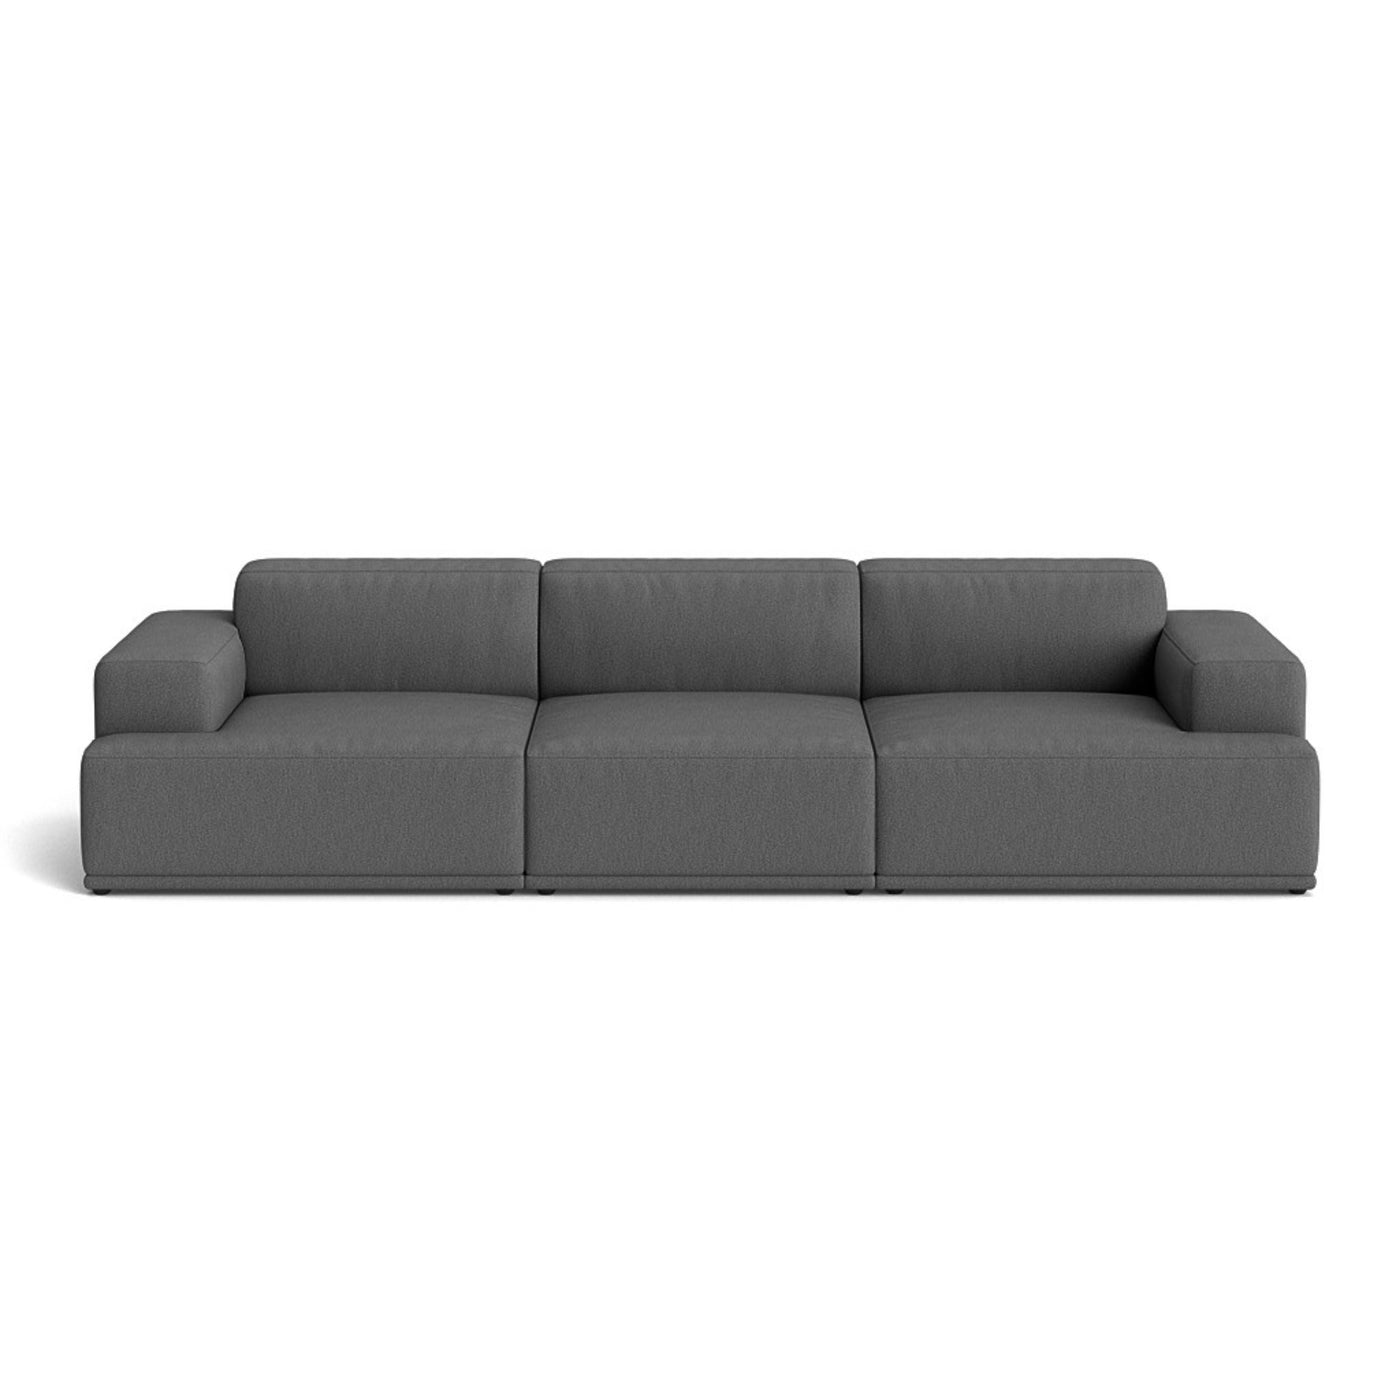 Muuto Connect Soft Modular 3 Seater Sofa, configuration 1. Made-to-order from someday designs. #colour_clay-13